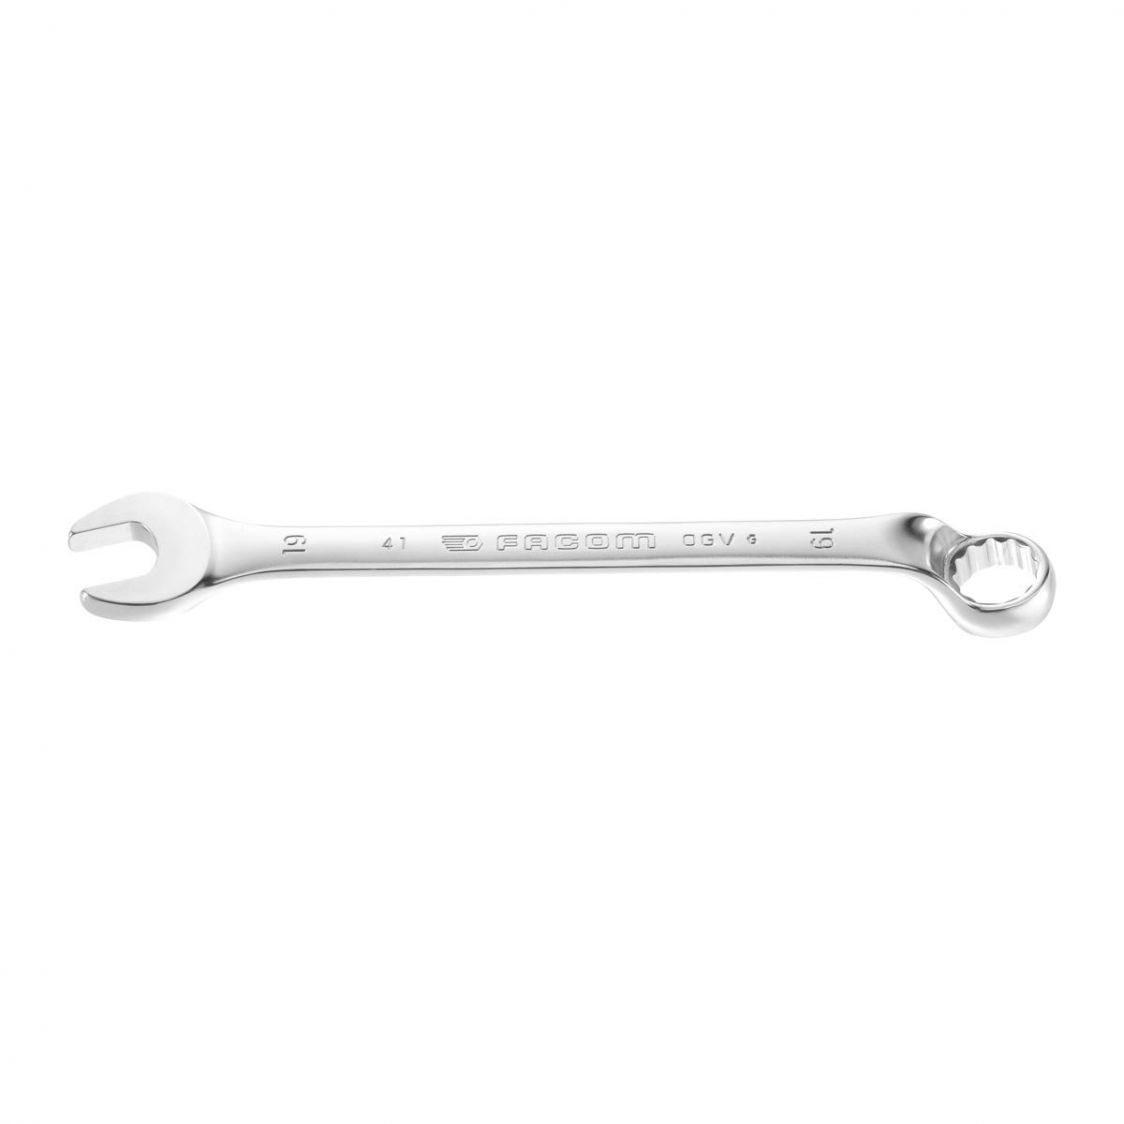 FACOM 41.23 - 23mm Metric Offset Combination Spanner